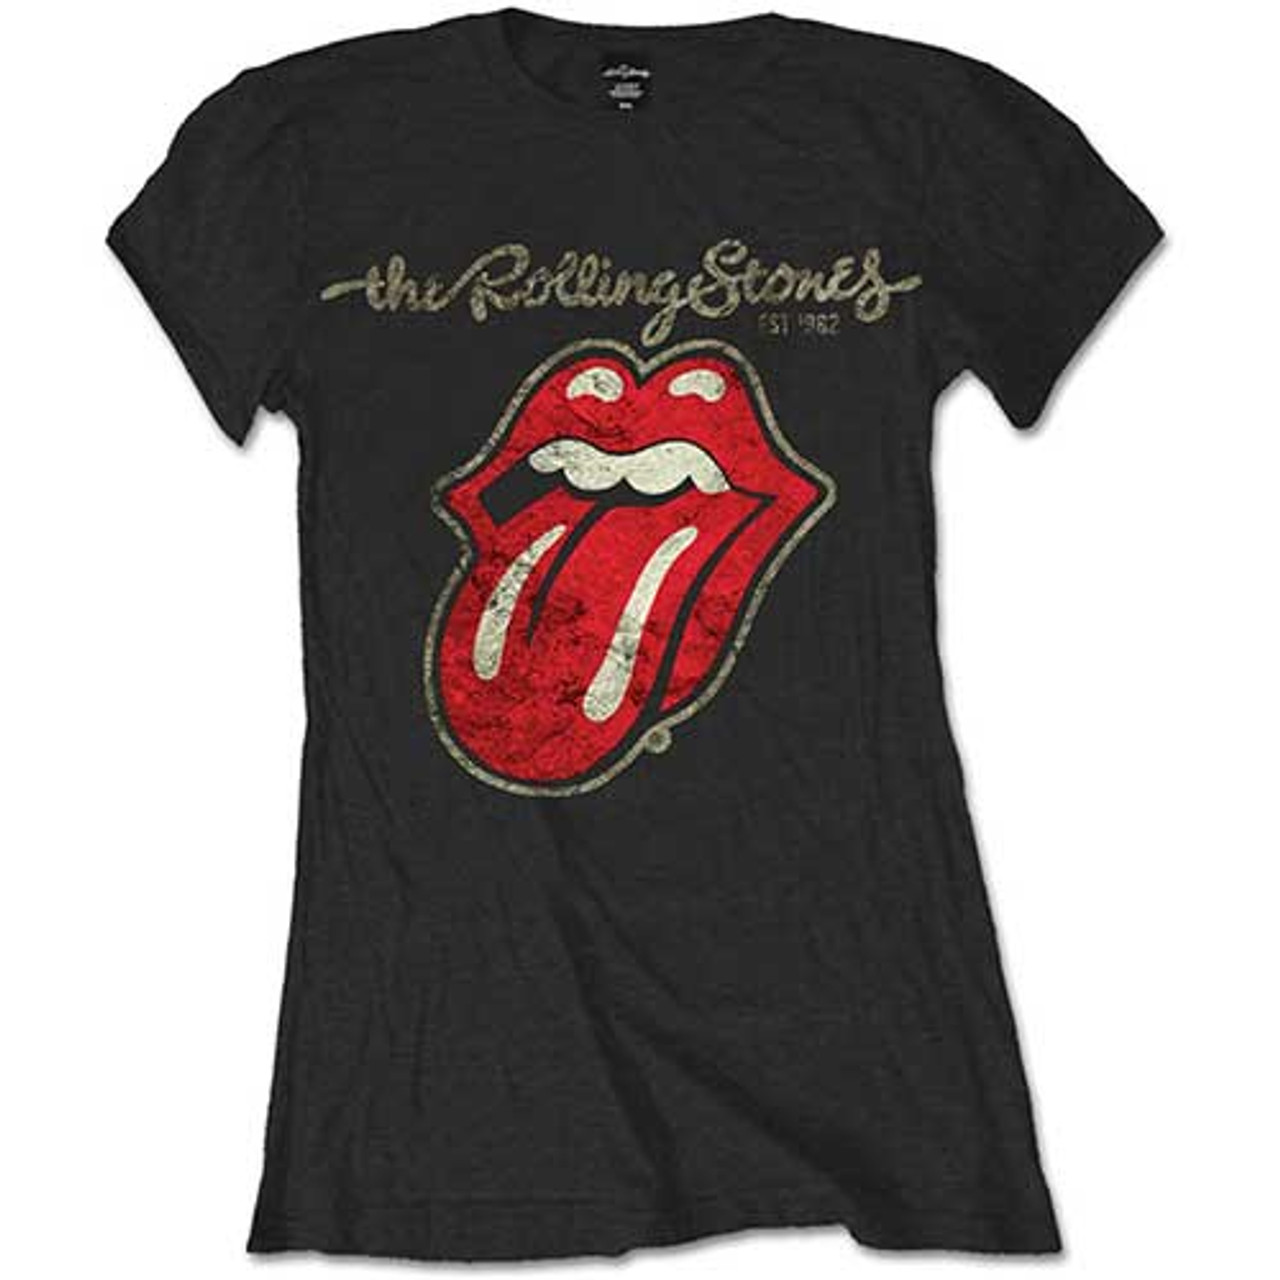 Rolling Stones 'Plastered Tongue' Womens Fitted T-Shirt